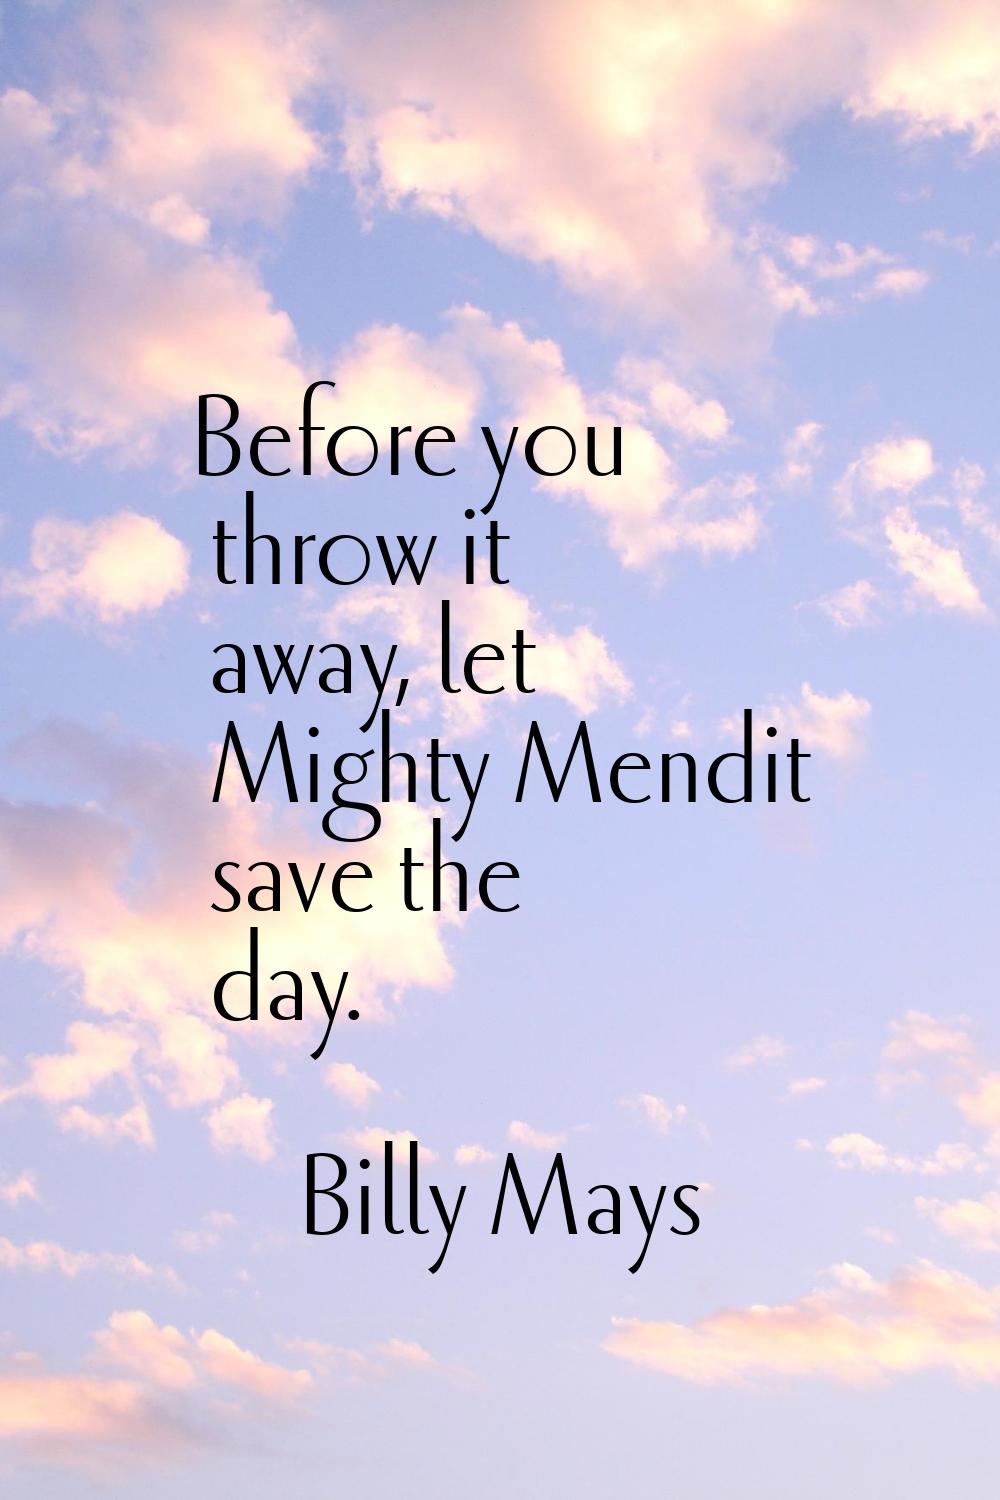 Before you throw it away, let Mighty Mendit save the day.